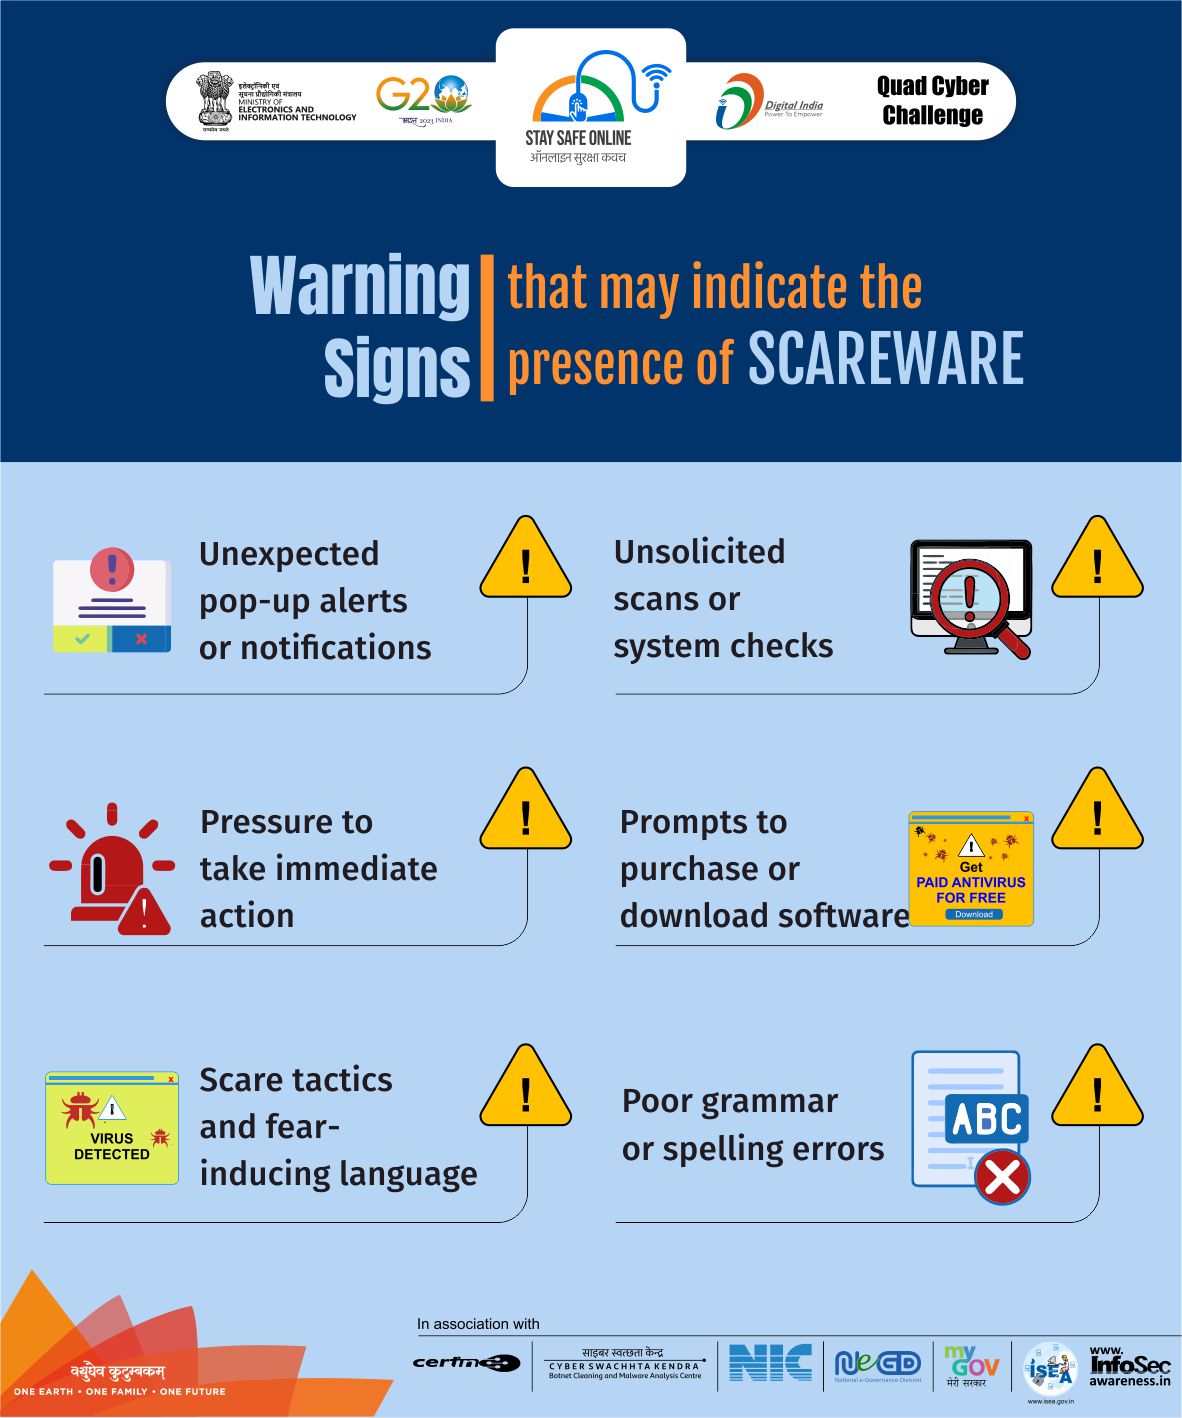 Cyber Offences - Scareware